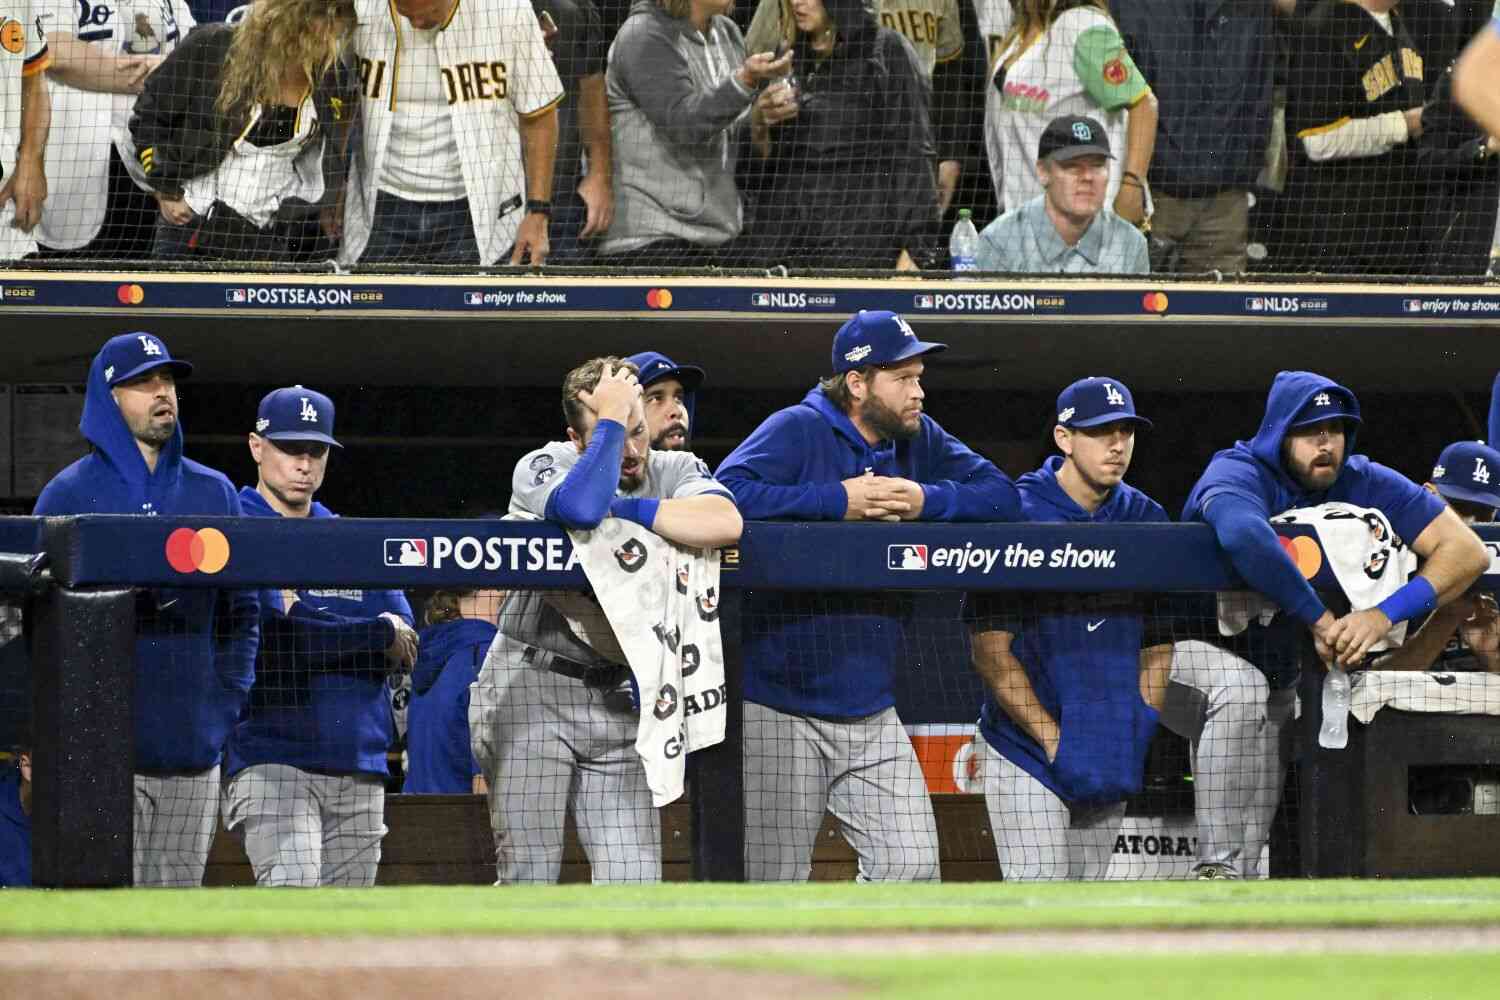 The Dodgers Don't Sleep in October